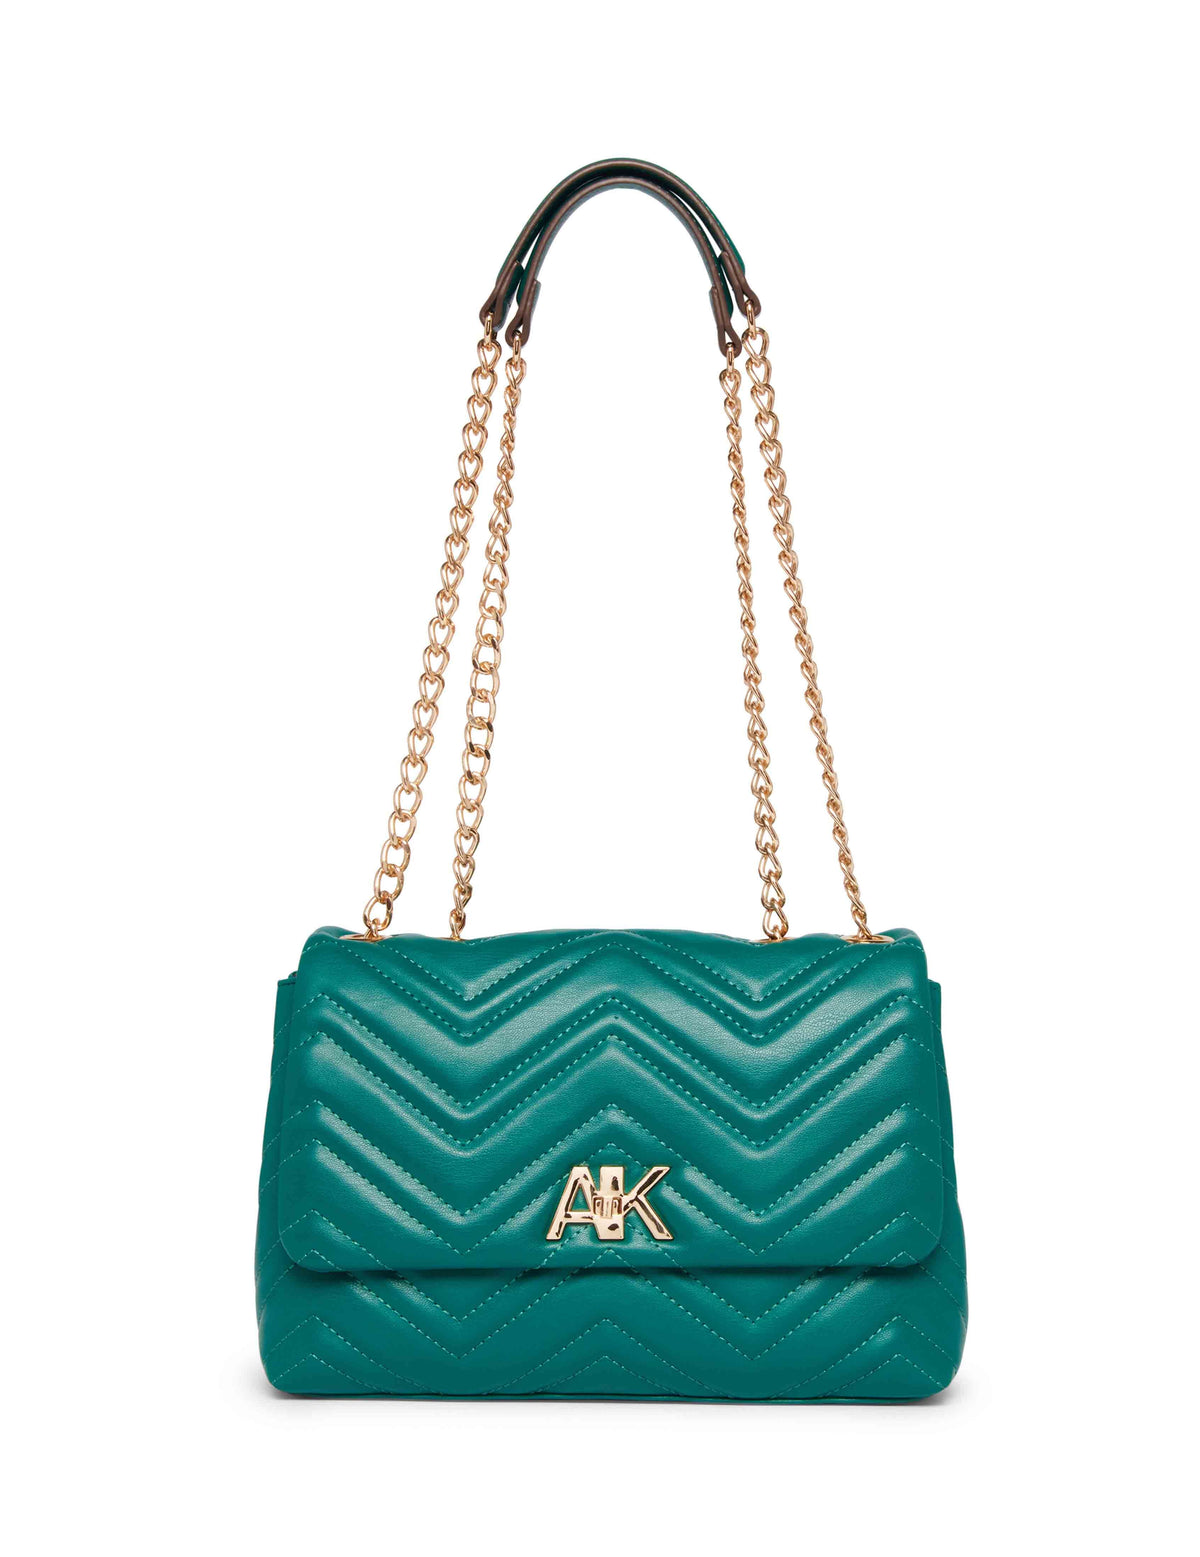 Anne Klein Emerald Quilted Convertible Flap Shoulder Bag With Turn Lock